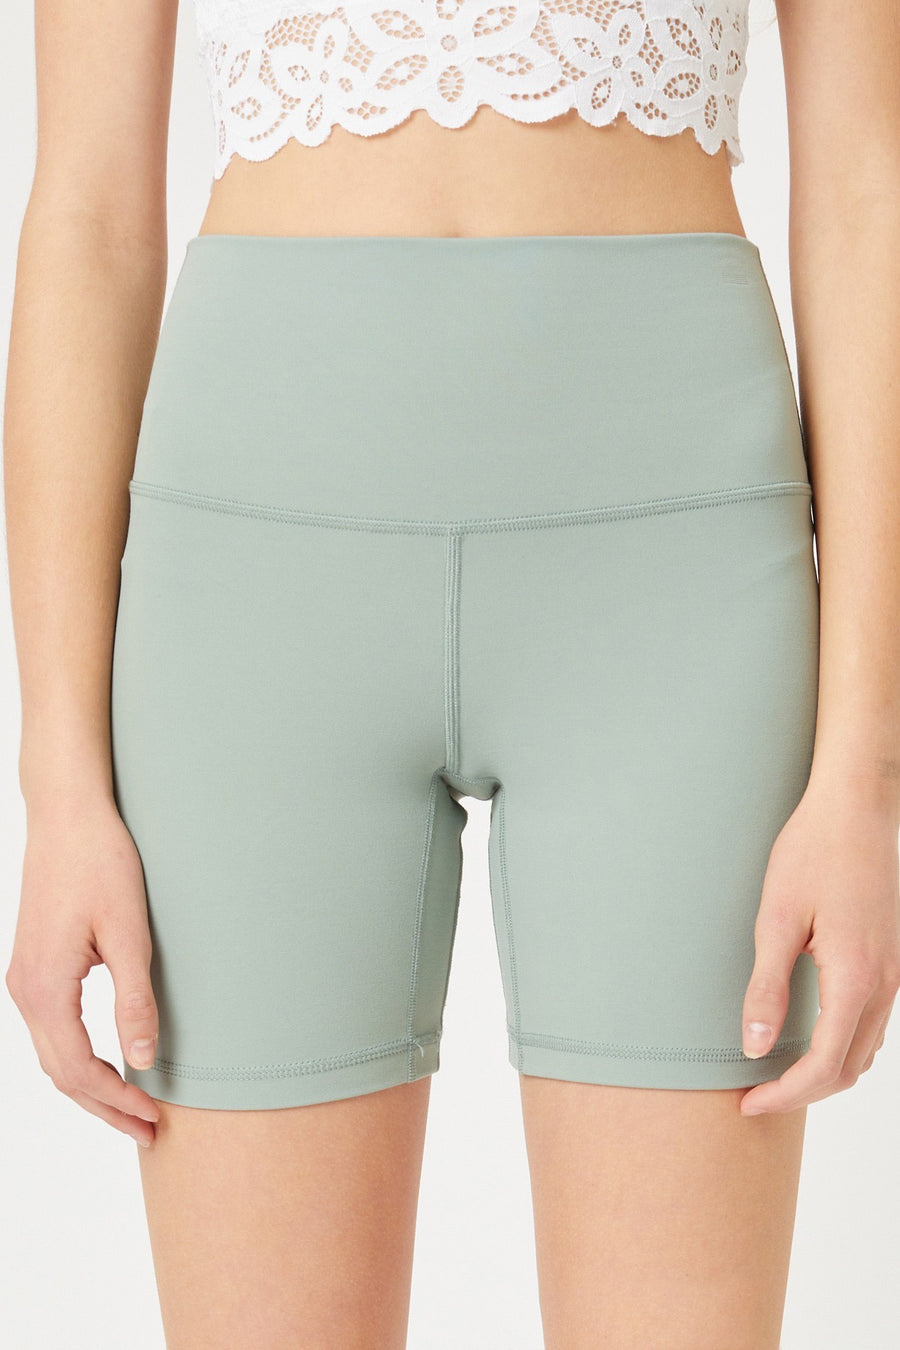 Biker shorts in the color olive stone.